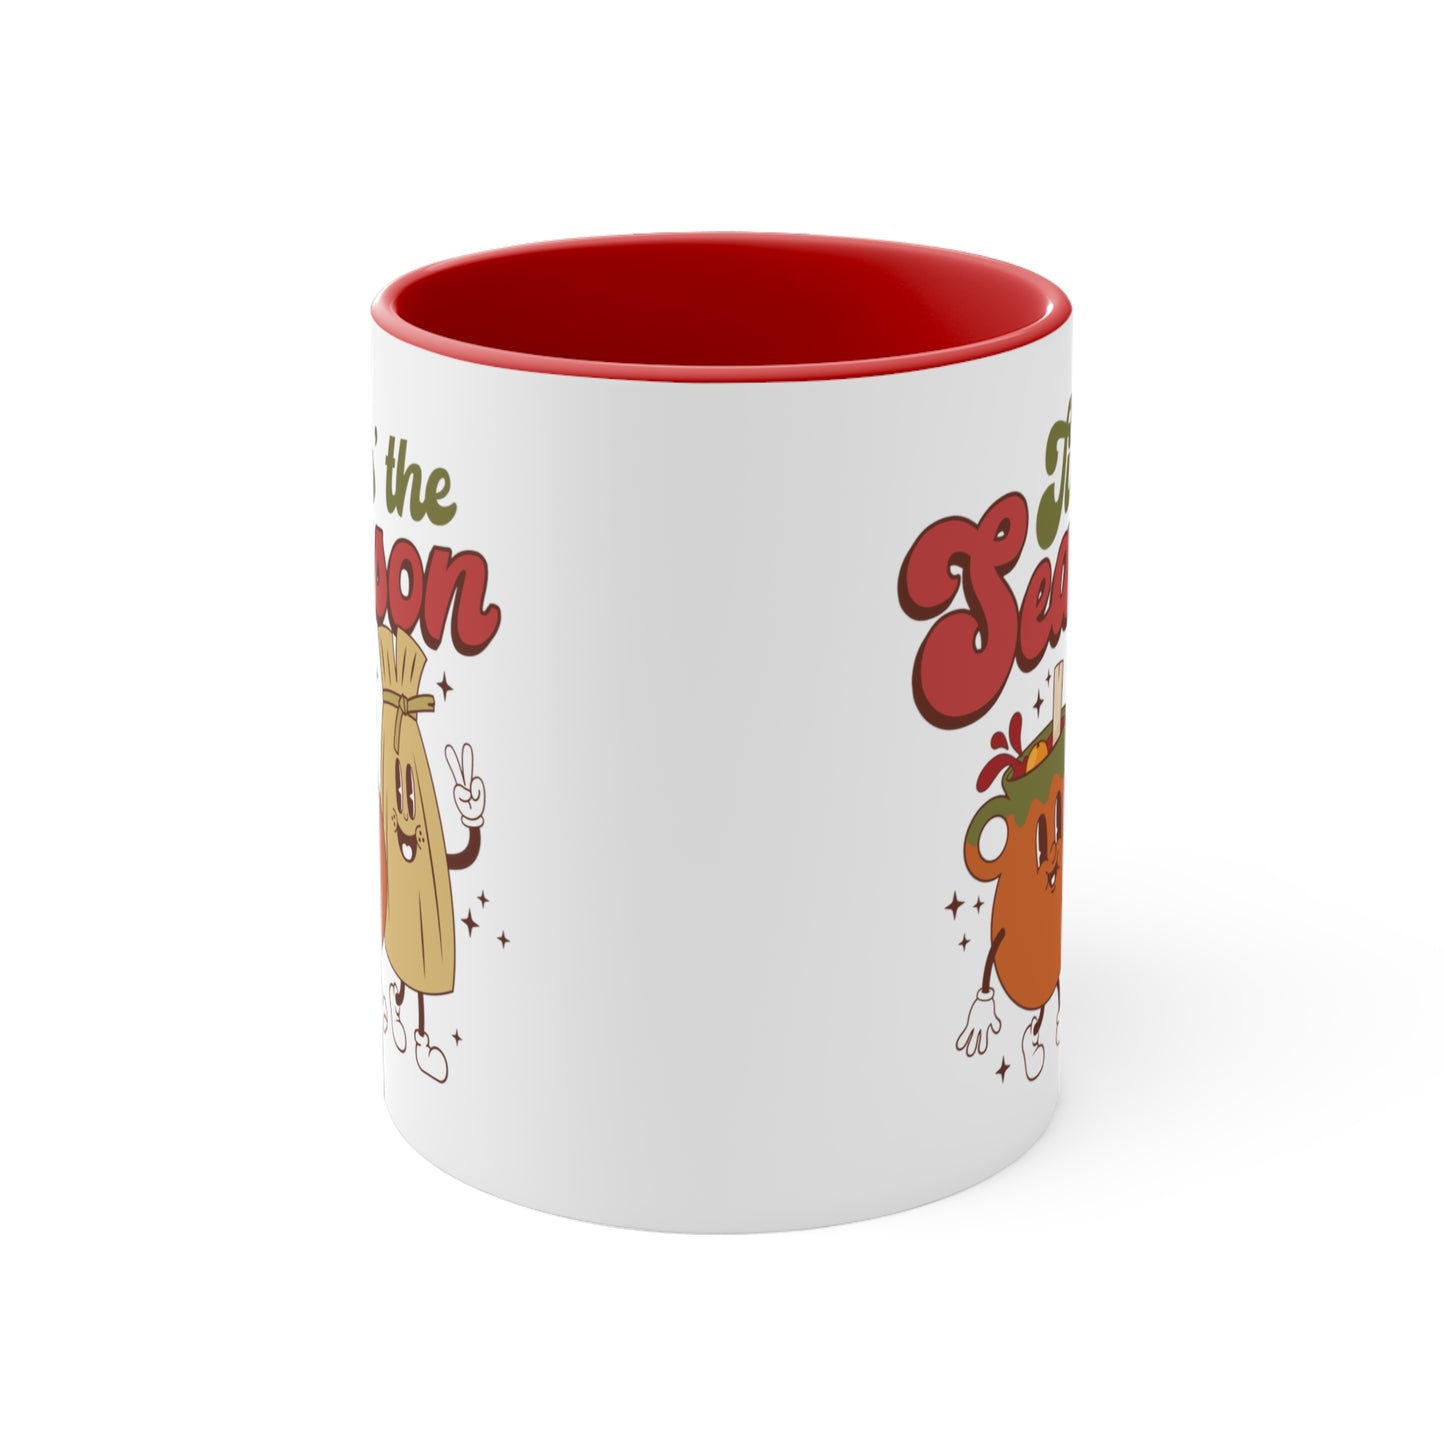 Mexican Coffee Mug, 11oz. Tamal y ponche mug for Mexican family or friends. This is the season Mexican edition.